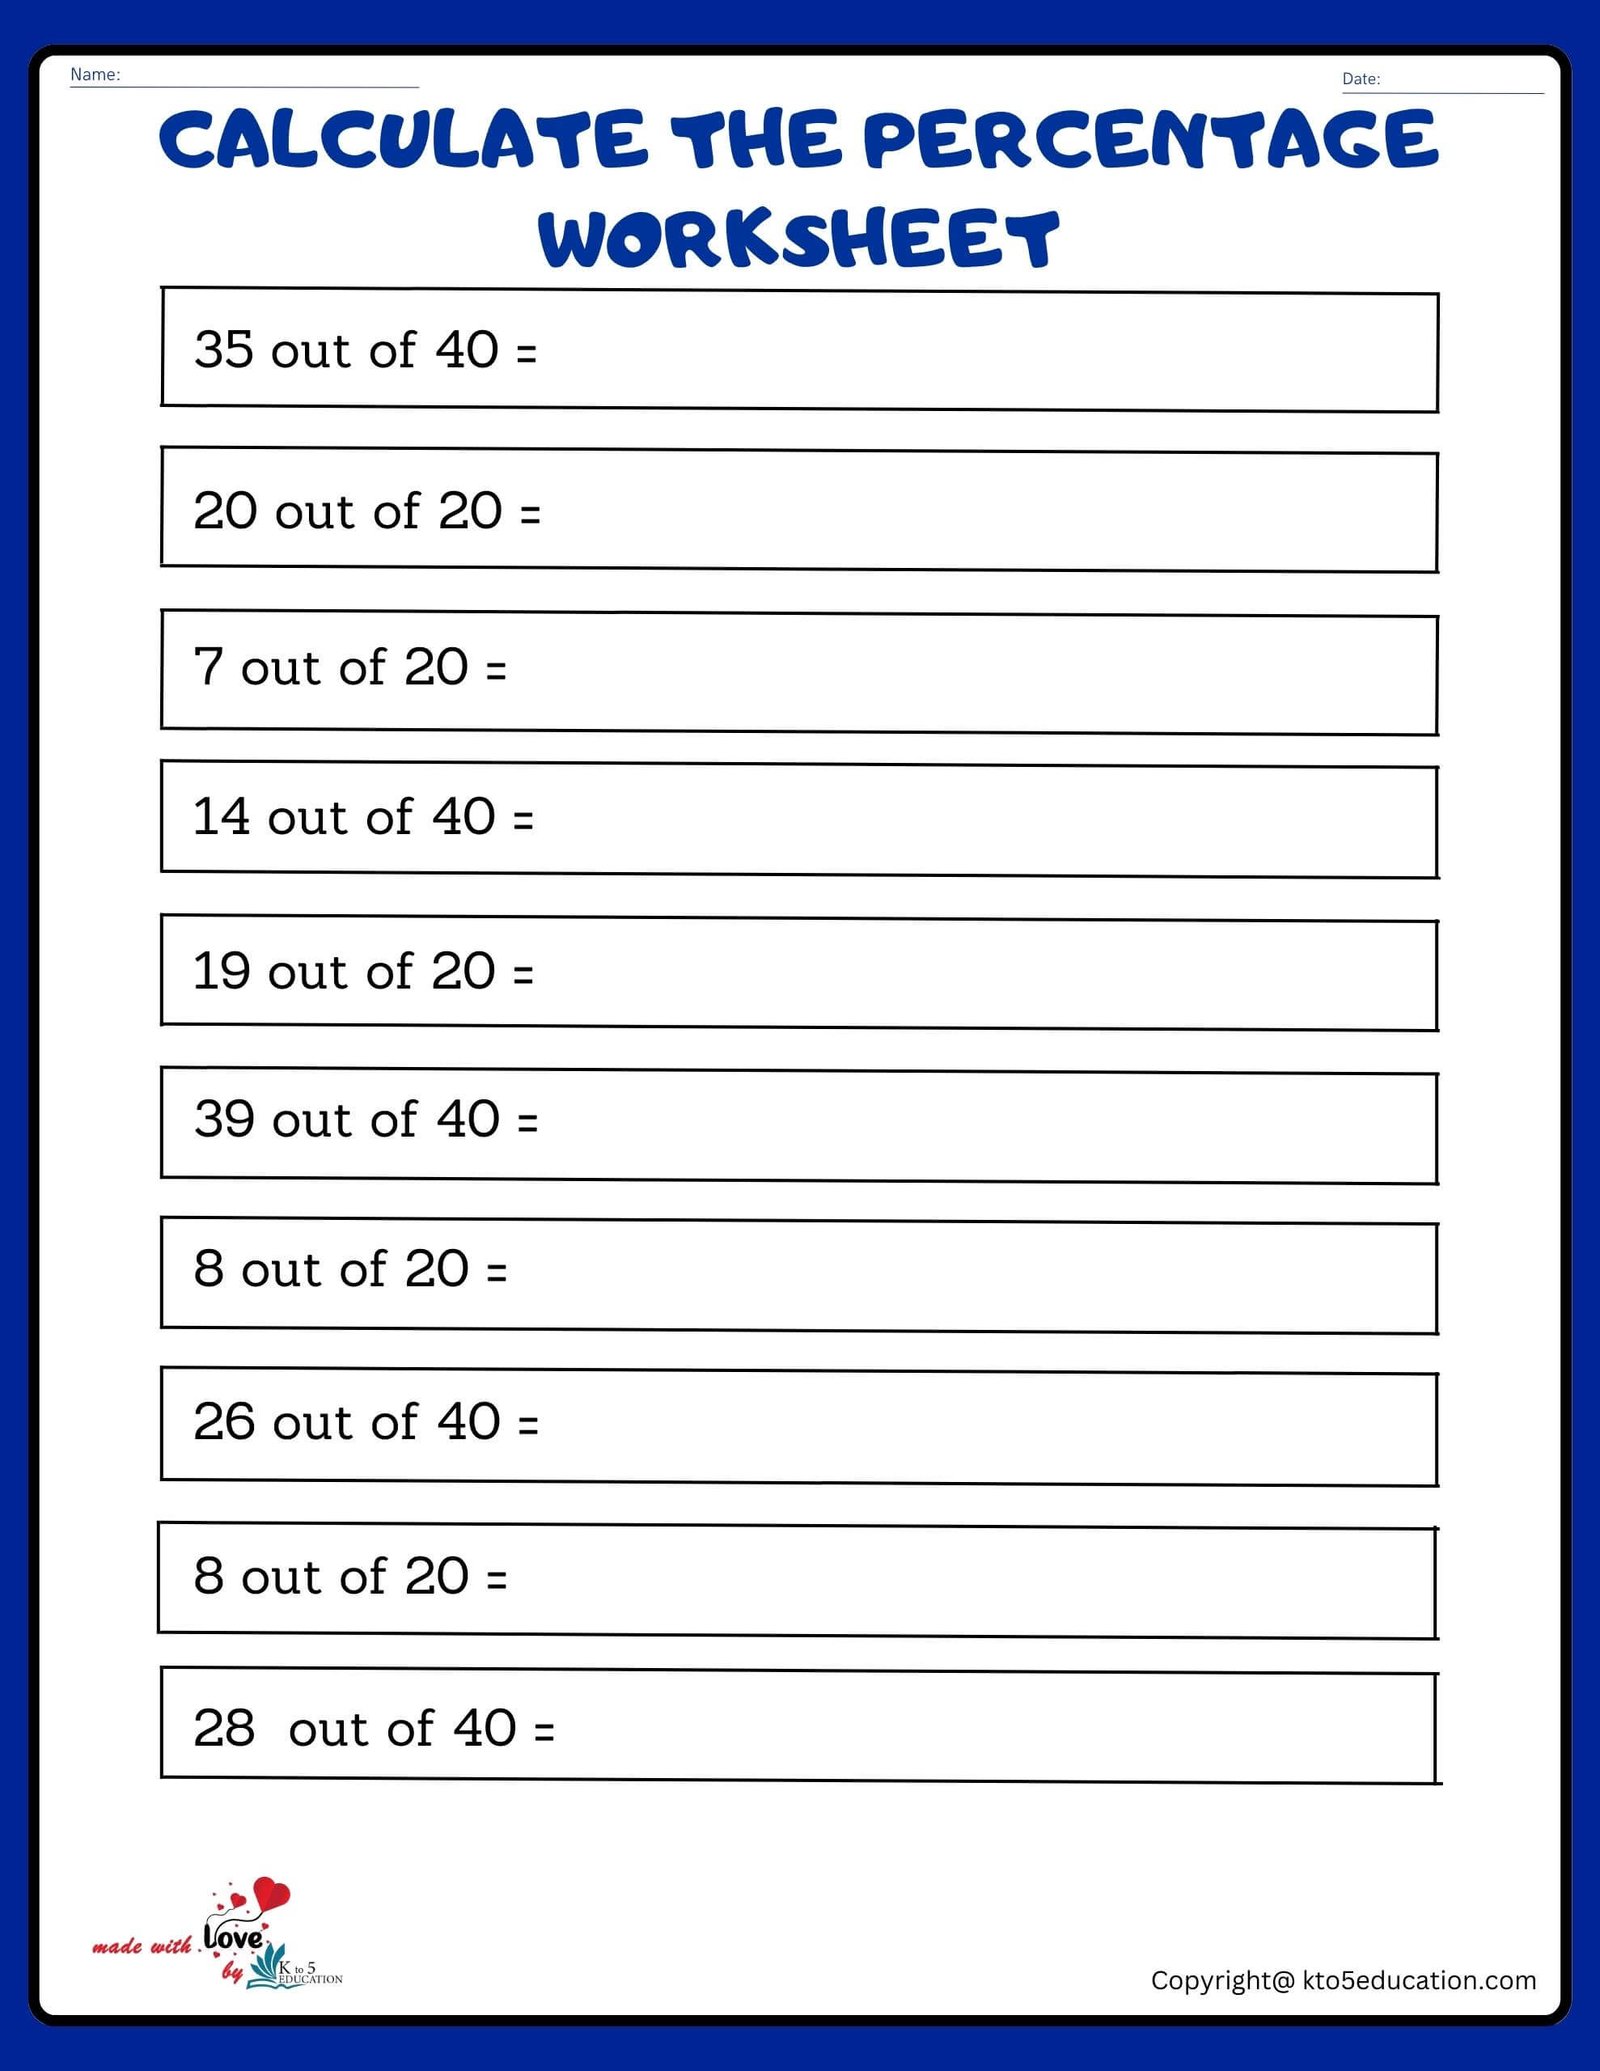 Calculate The Percentage Of Worksheet